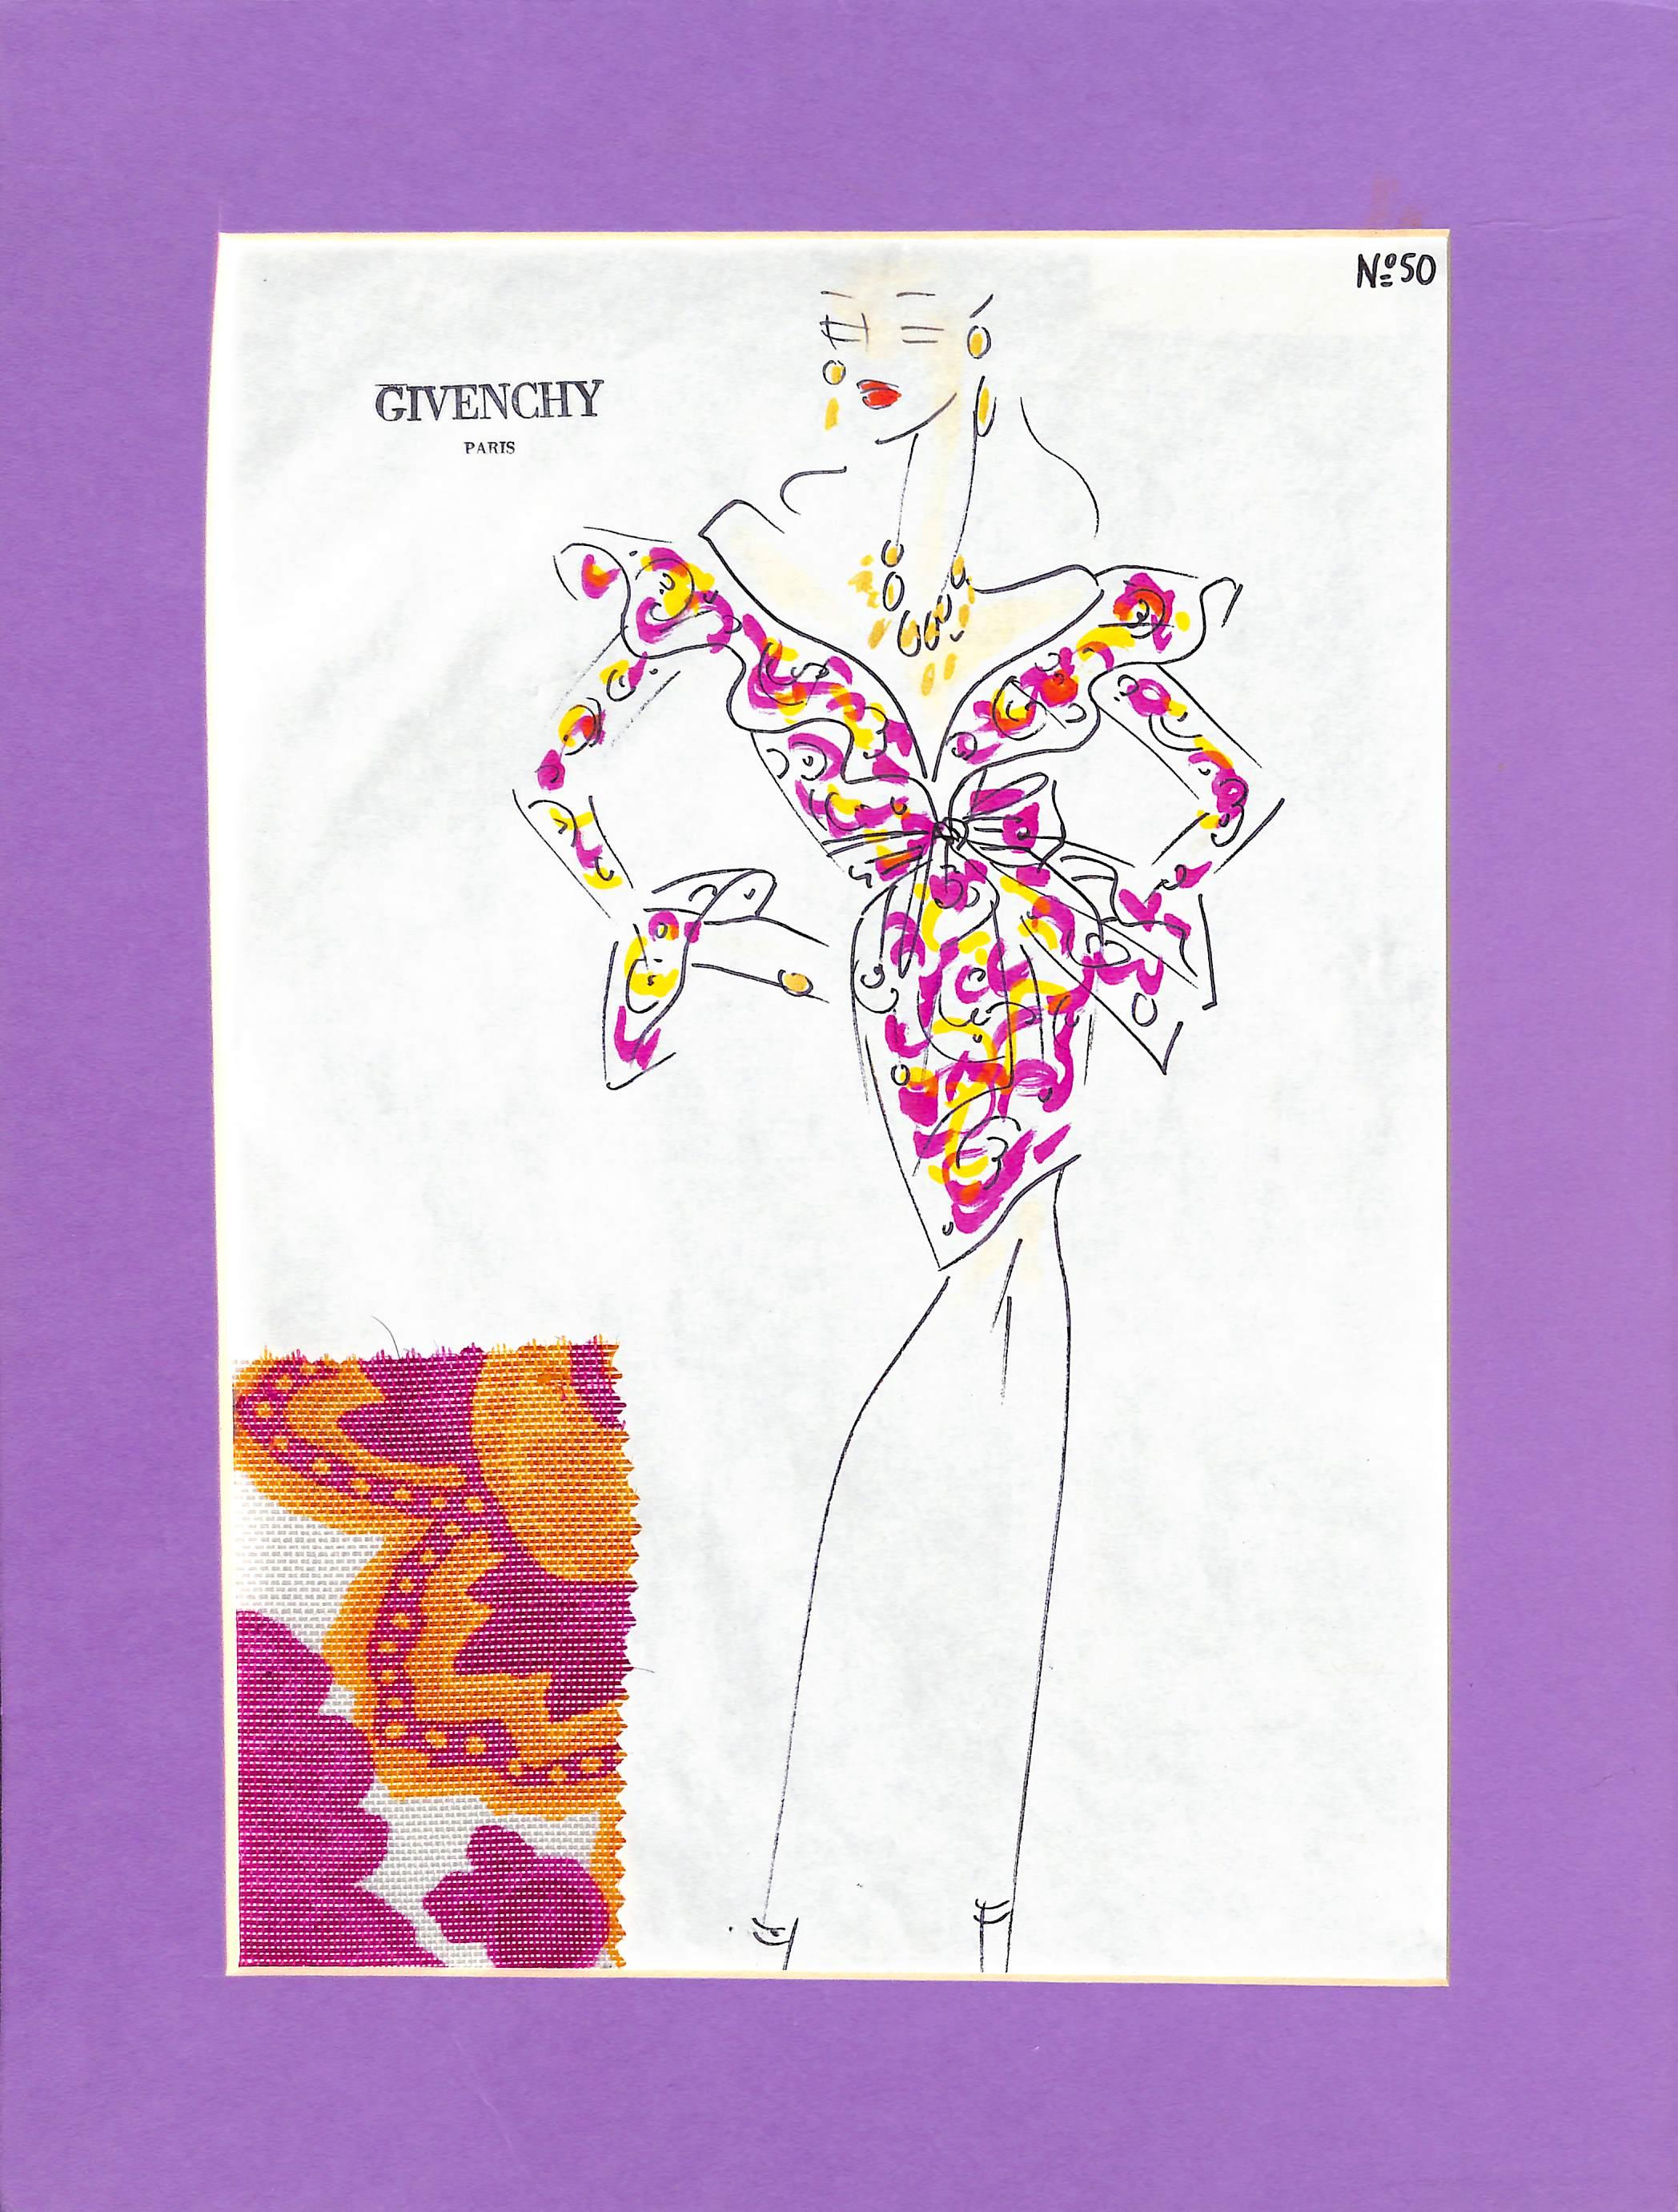 "Givenchy Paris No 50 Hand-Colored Fashion Plate w/ Couture Fabric Swatch" - Art by Givenchy (atelier)